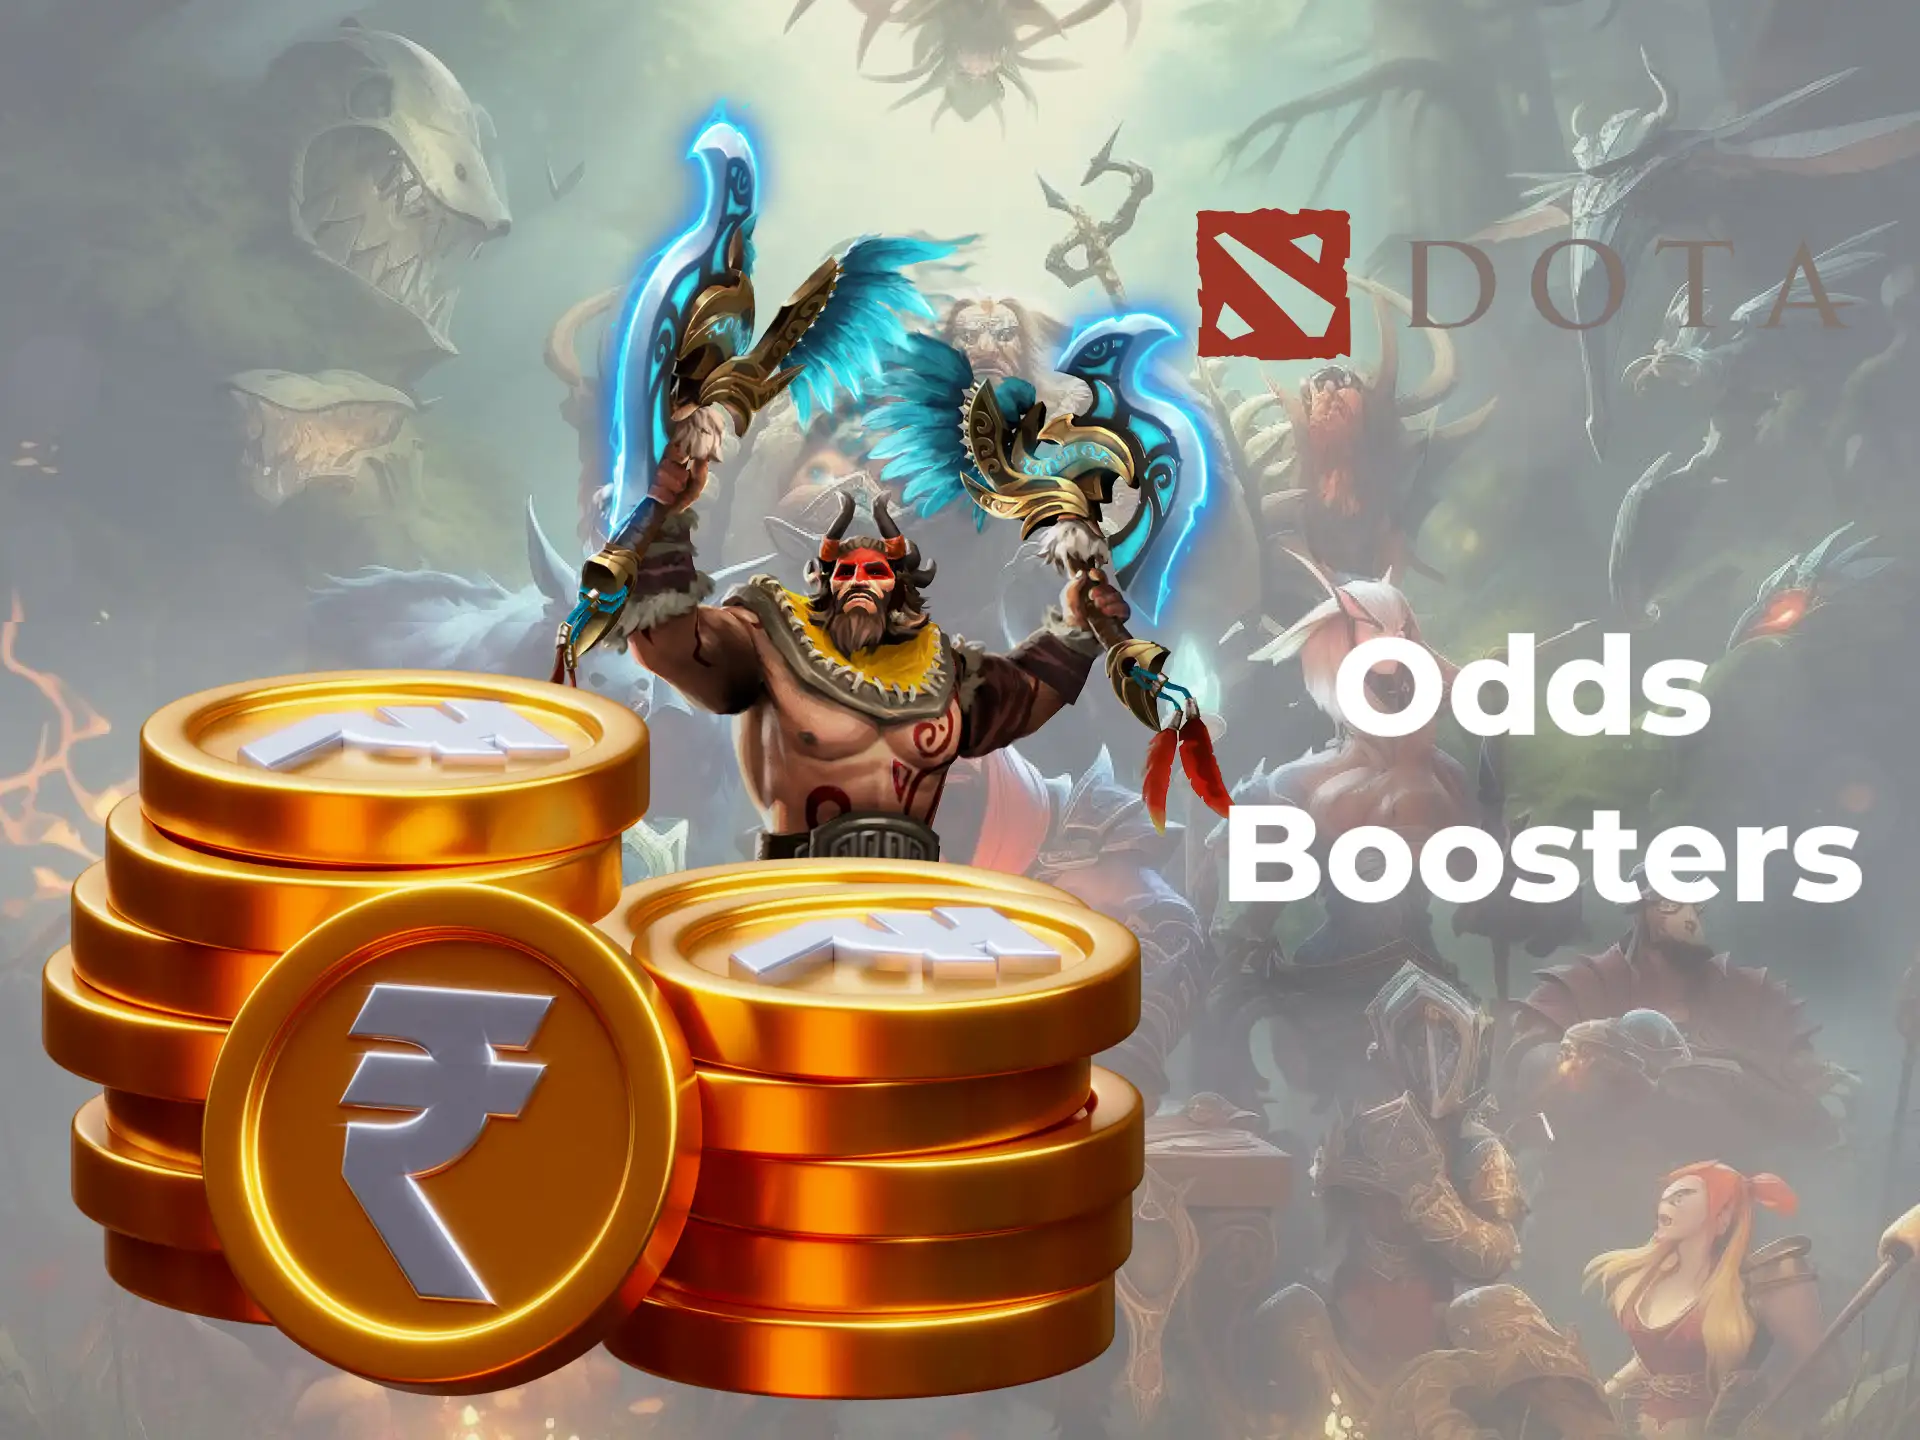 Odds boosters are often used in cyber sports disciplines.